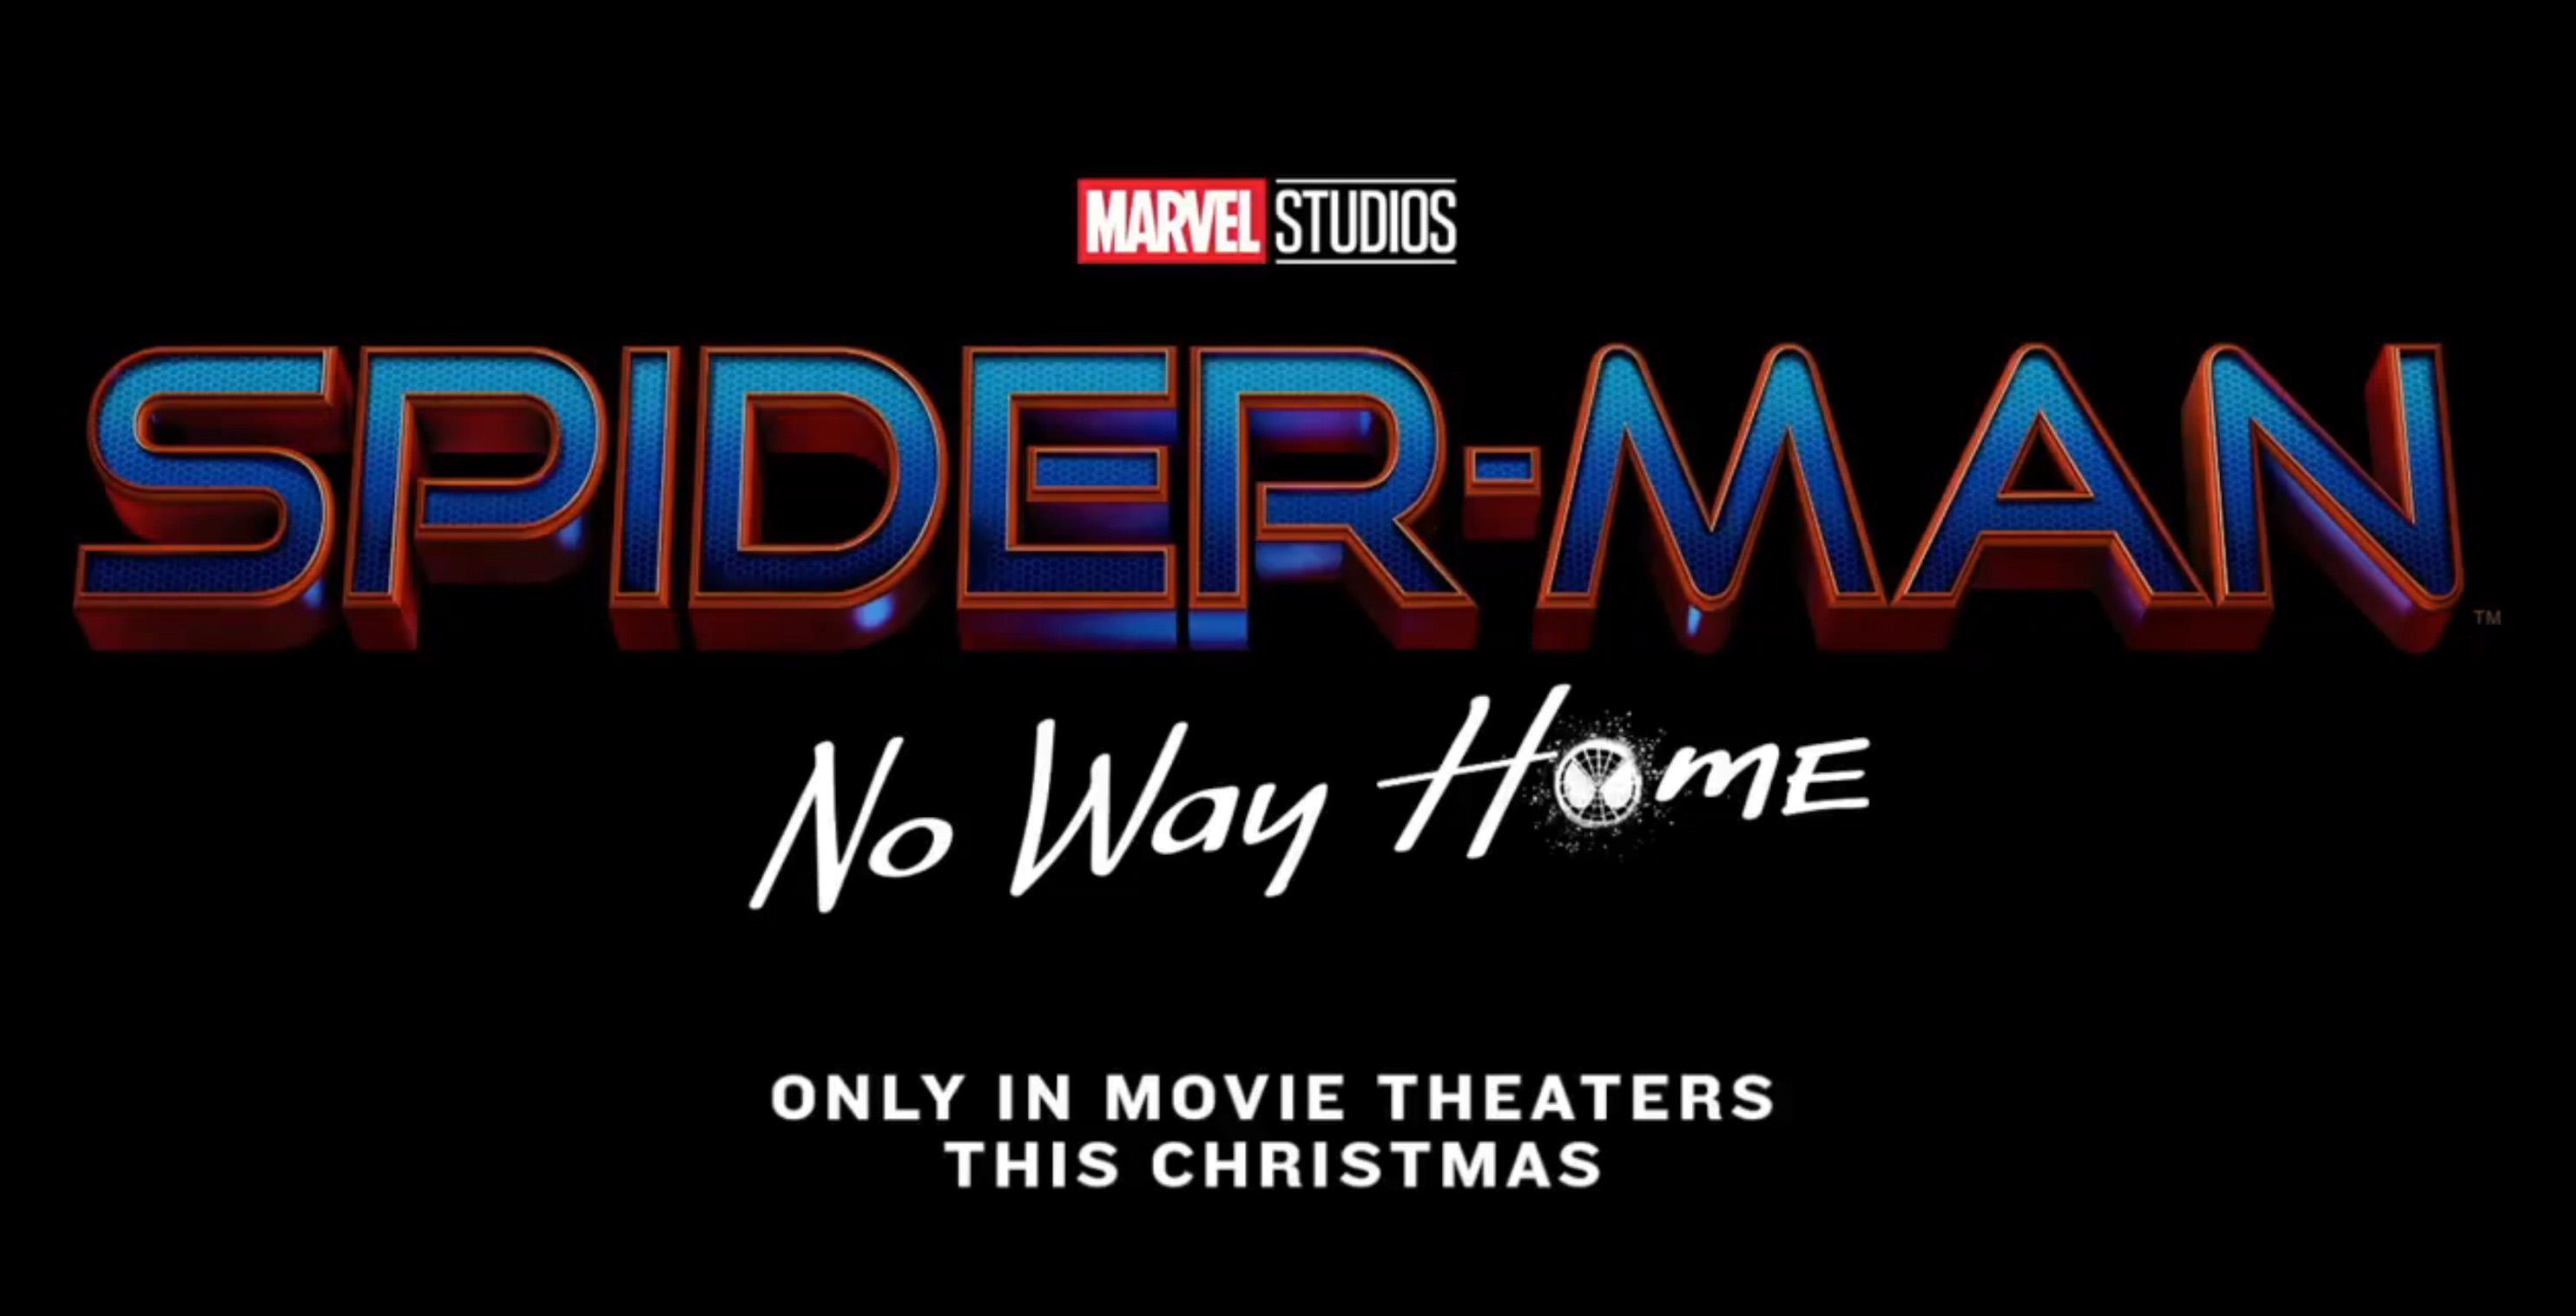 Spider-Man: No Way Home': Trailer and everything we know | What to Watch